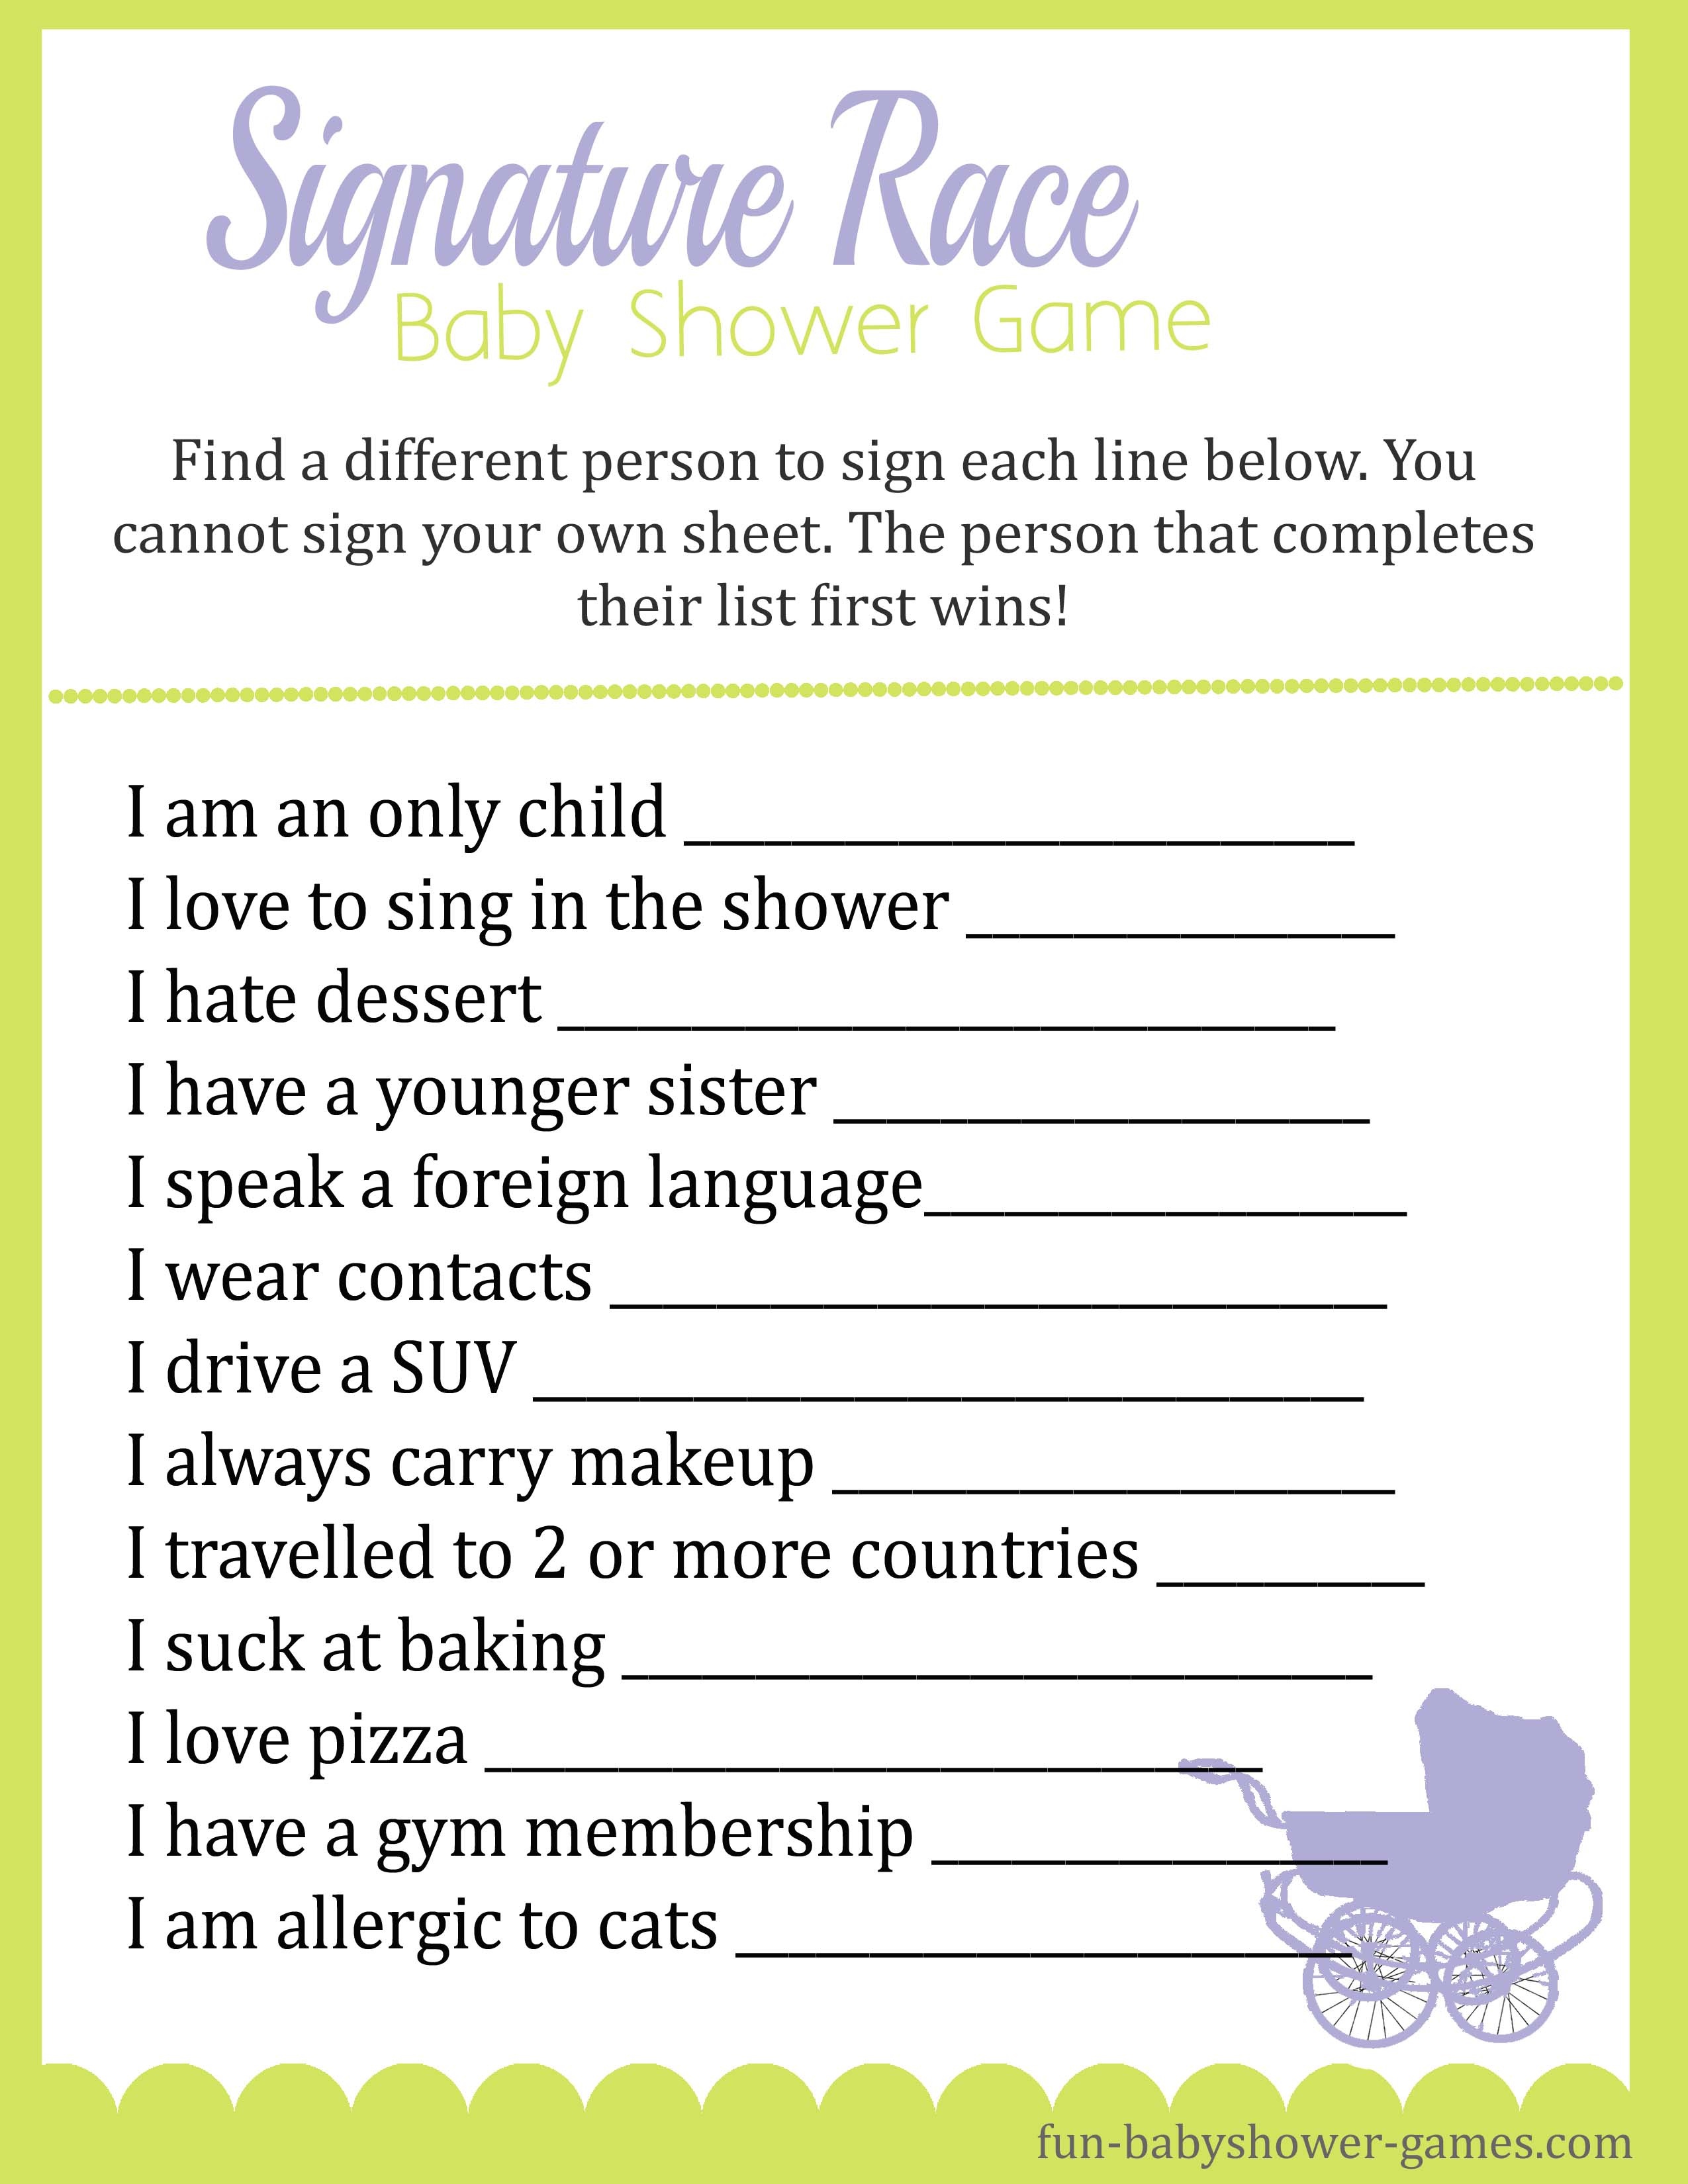 Fun Baby Shower Games To Make Your Shower A Memorable Day - Pass The Prize Baby Shower Game Free Printable